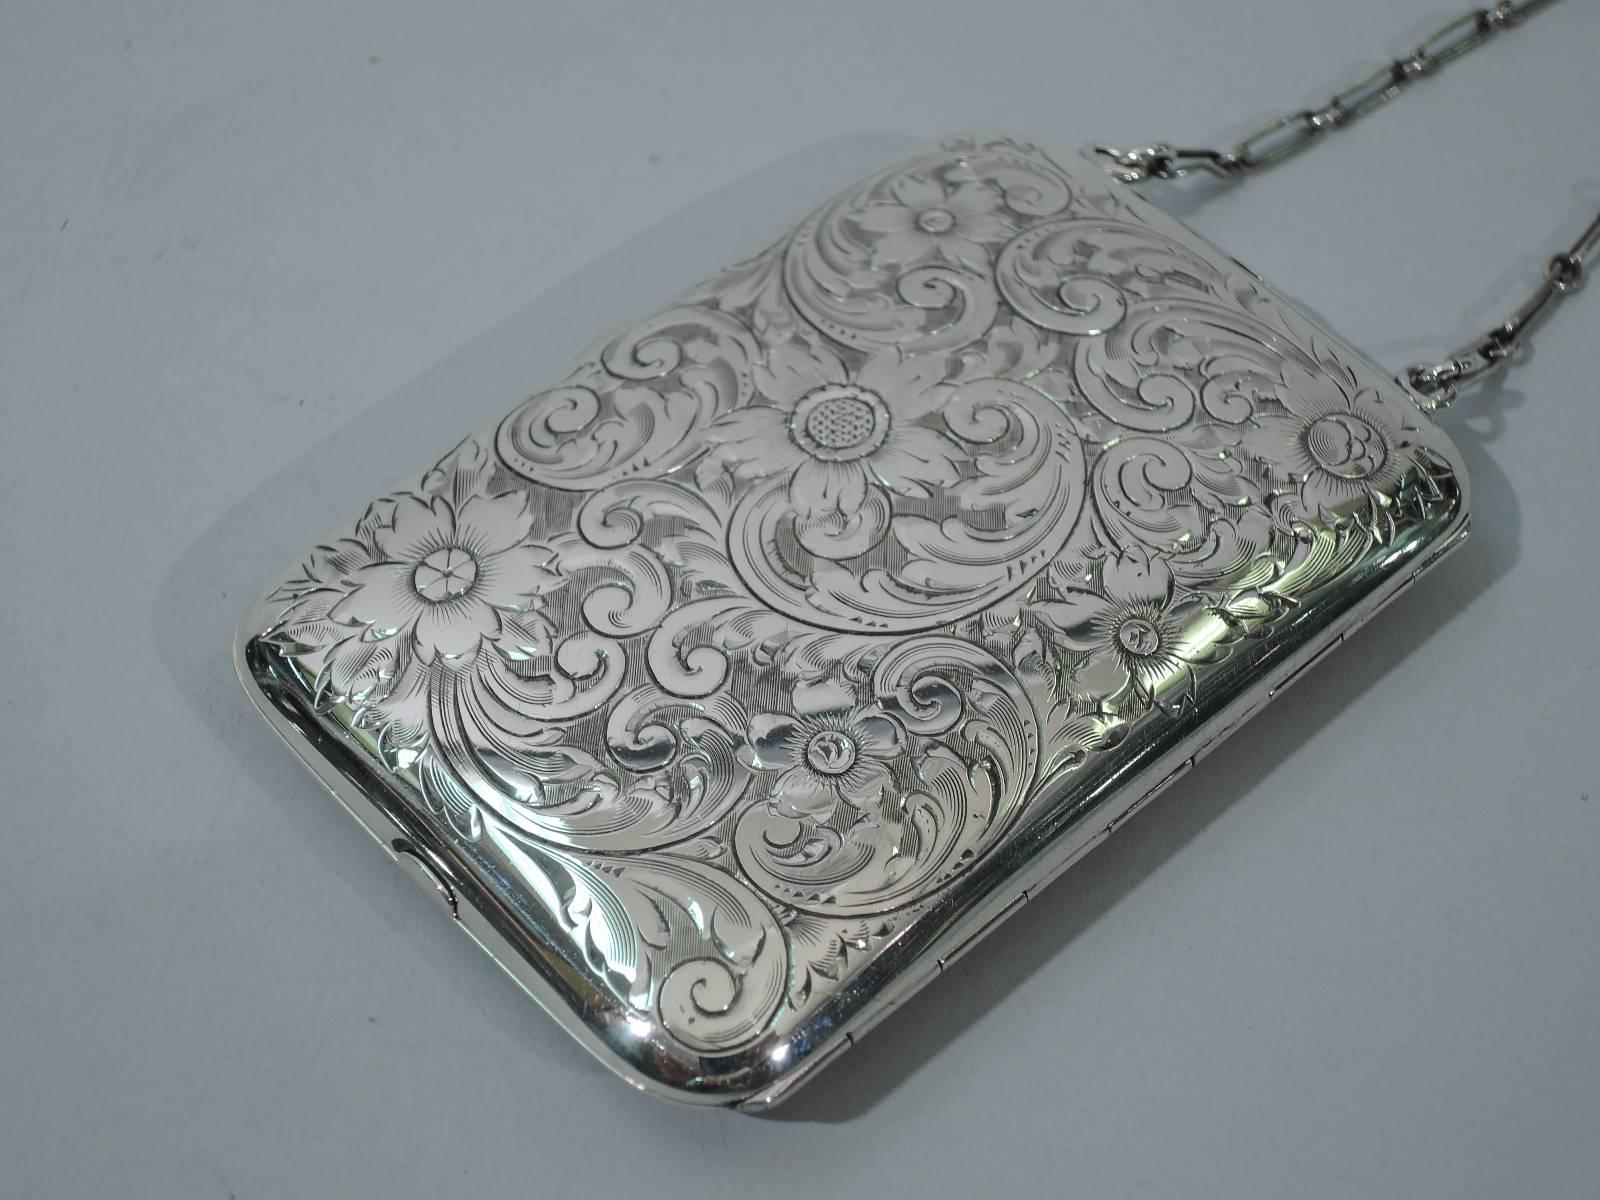 20th Century American Edwardian Sterling Silver Compact Purse with Wrist Chain